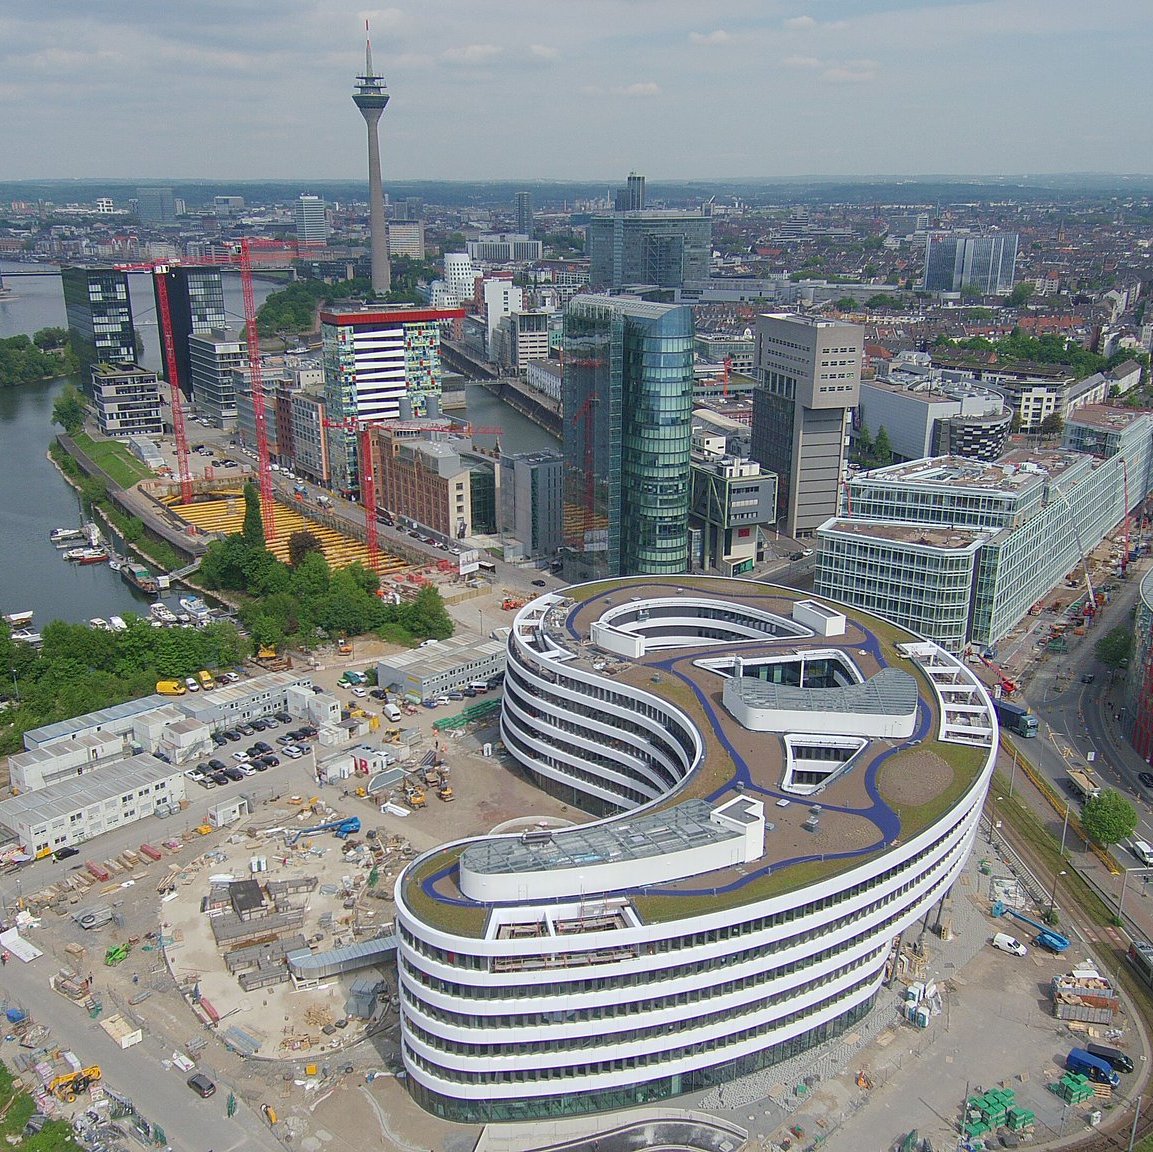 Aerial view of the new trivago campus